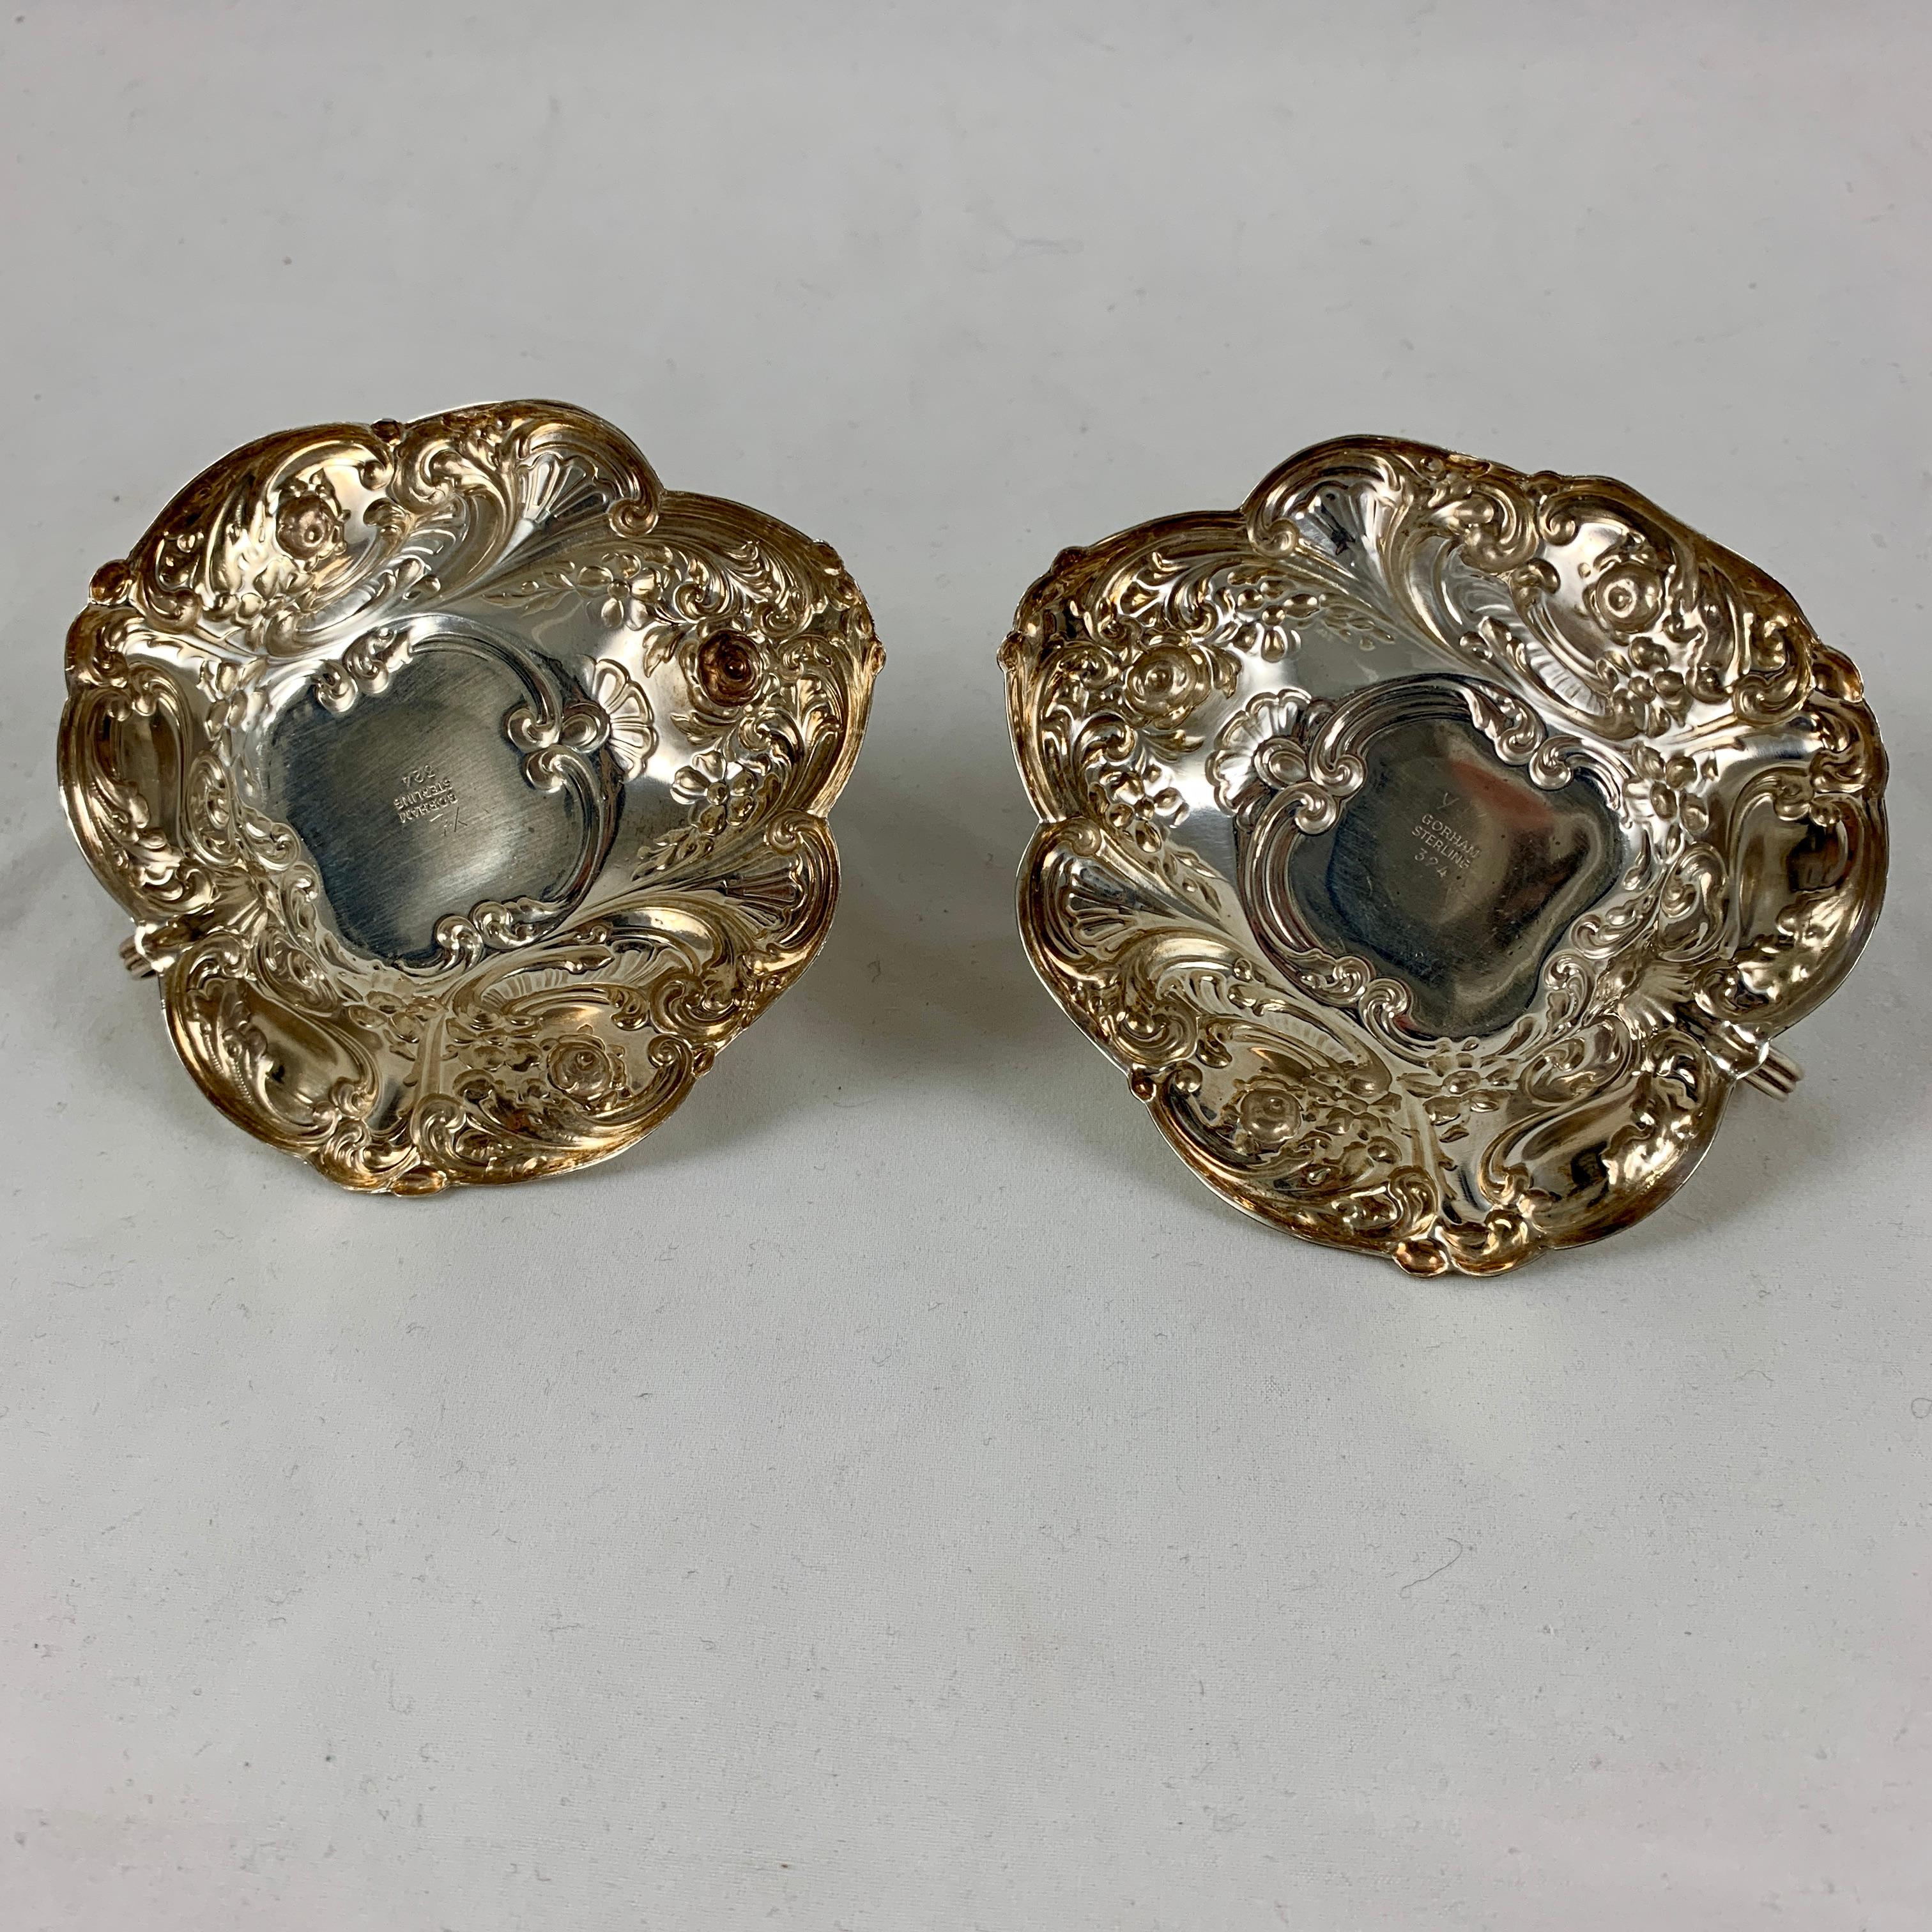 Gorham Sterling Silver Floral Repoussé Chambersticks, circa 1920-1930, a Pair For Sale 6